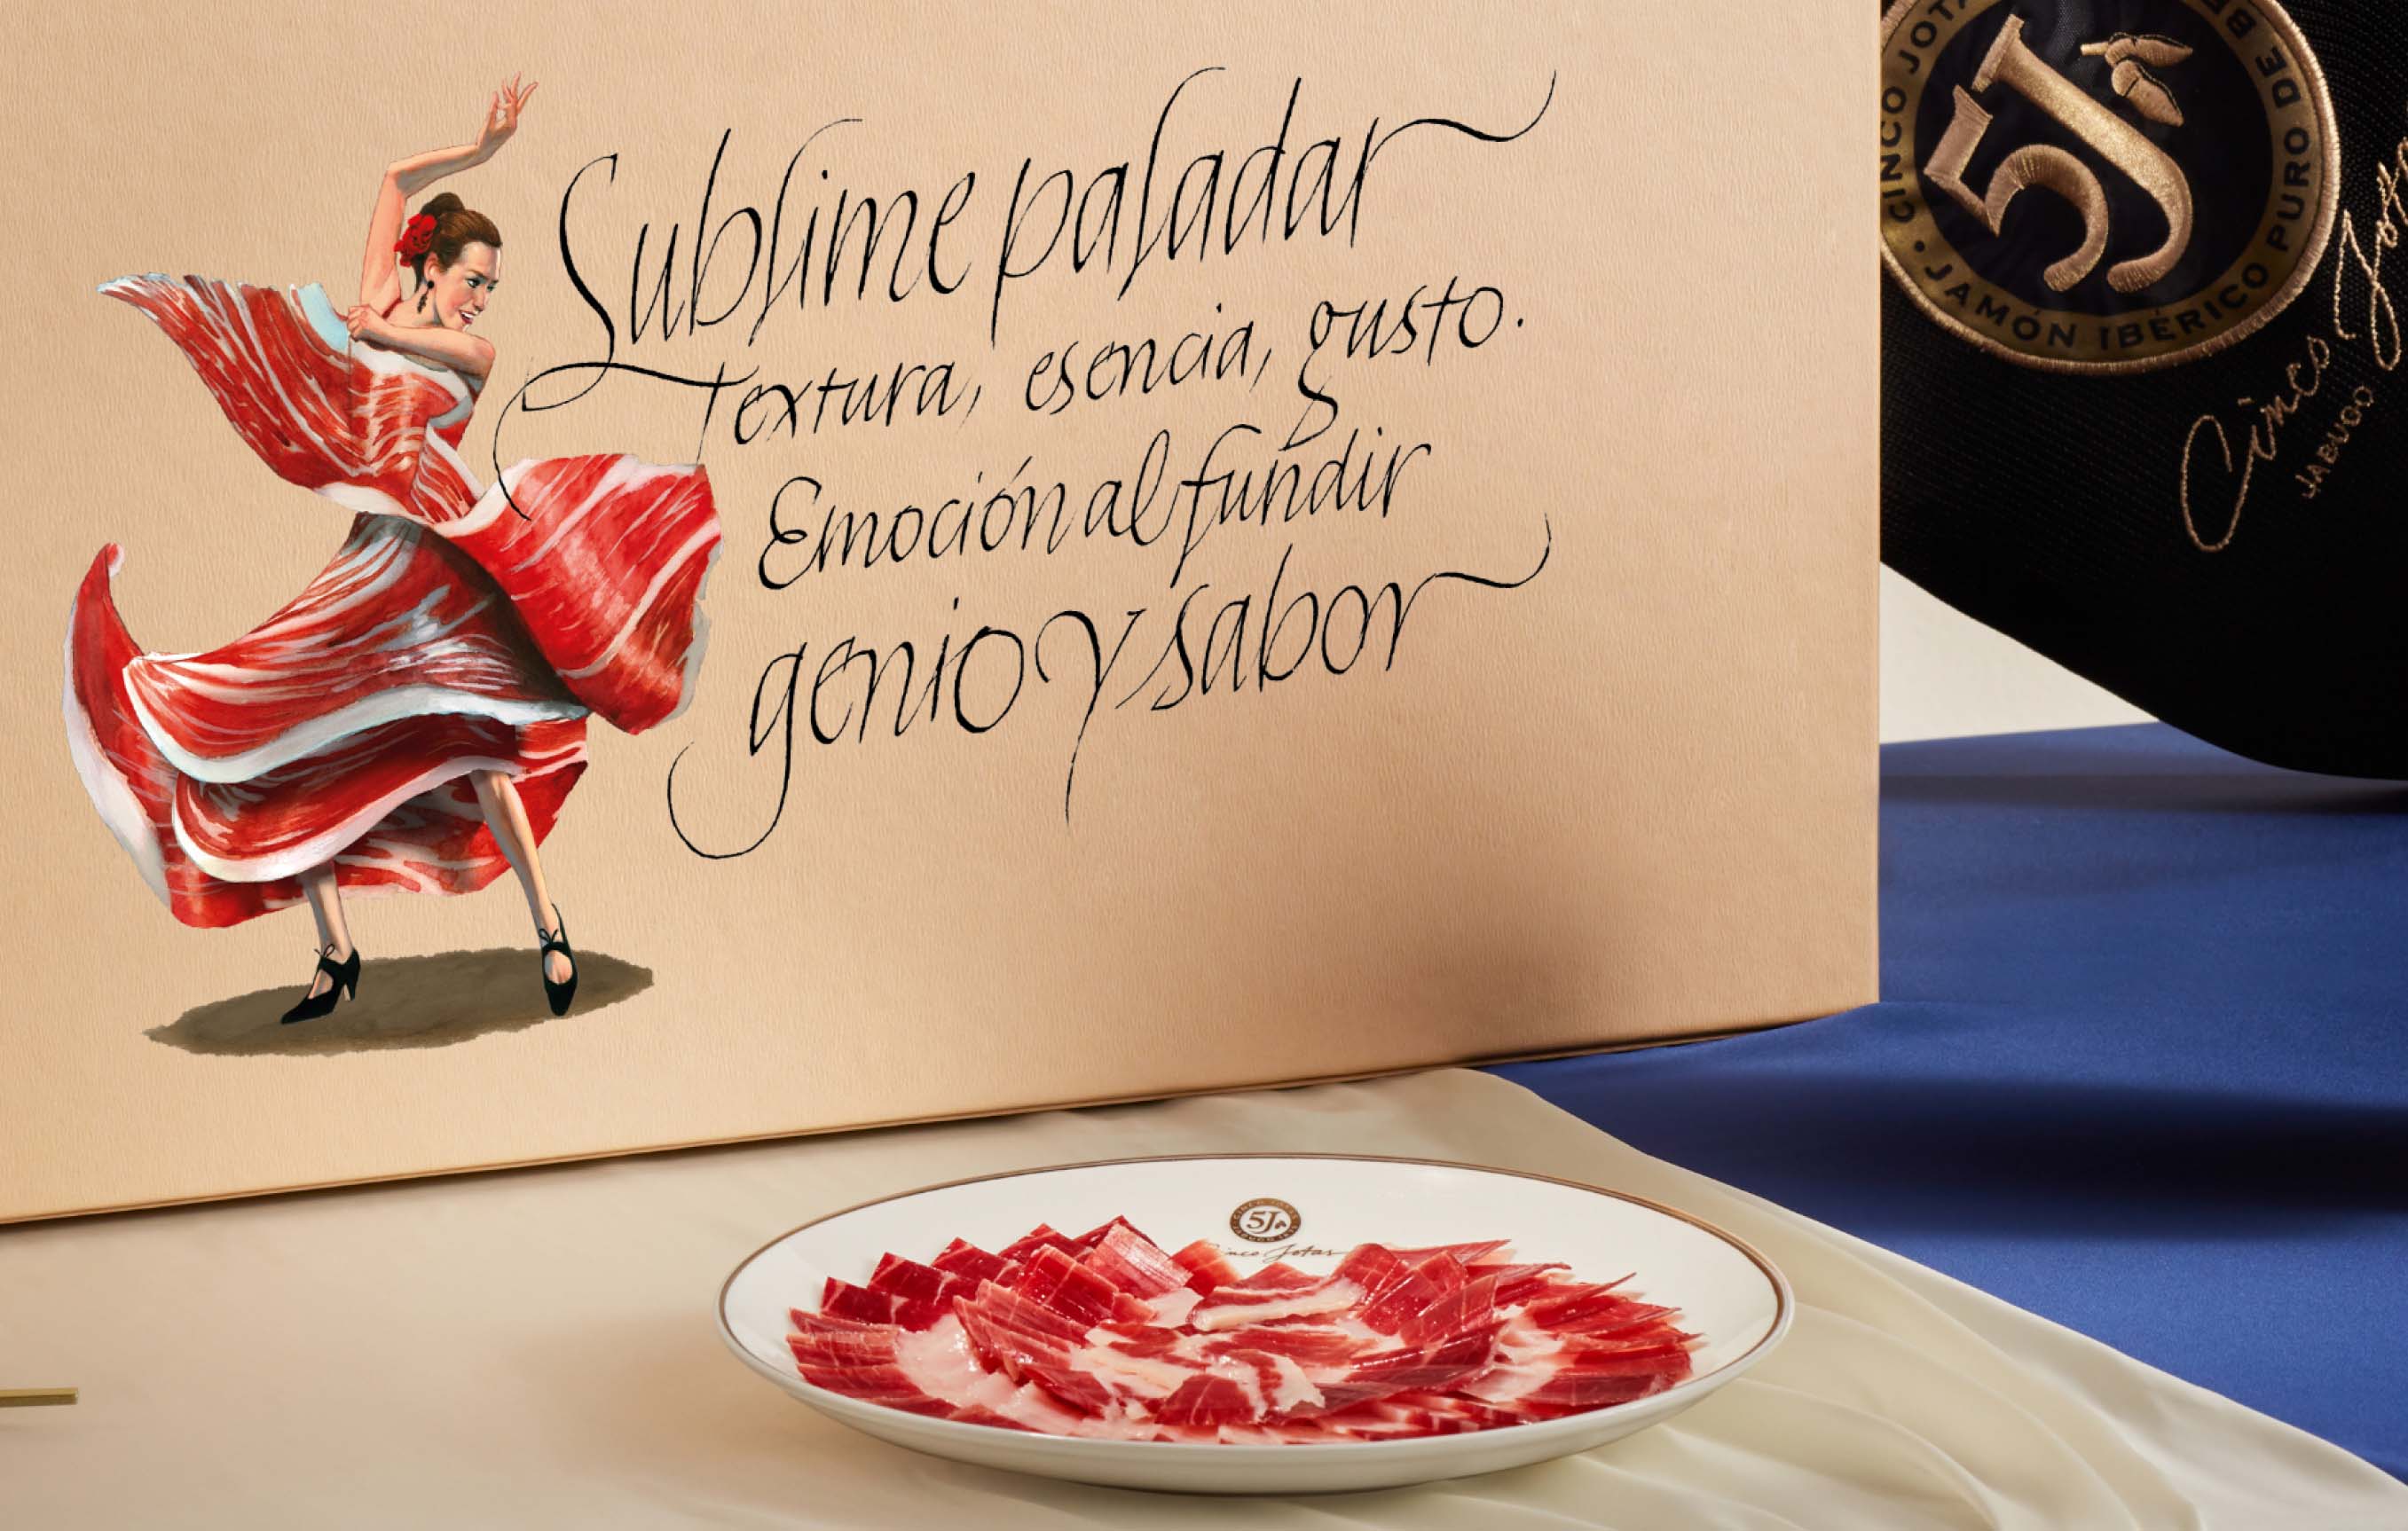 Cinco Jotas is a legendary brand with more than 130 years of experience, preserving the purity and authenticity of the world’s best 100% Iberian pork products – a tribute to craftsmanship, flavor and tradition.
